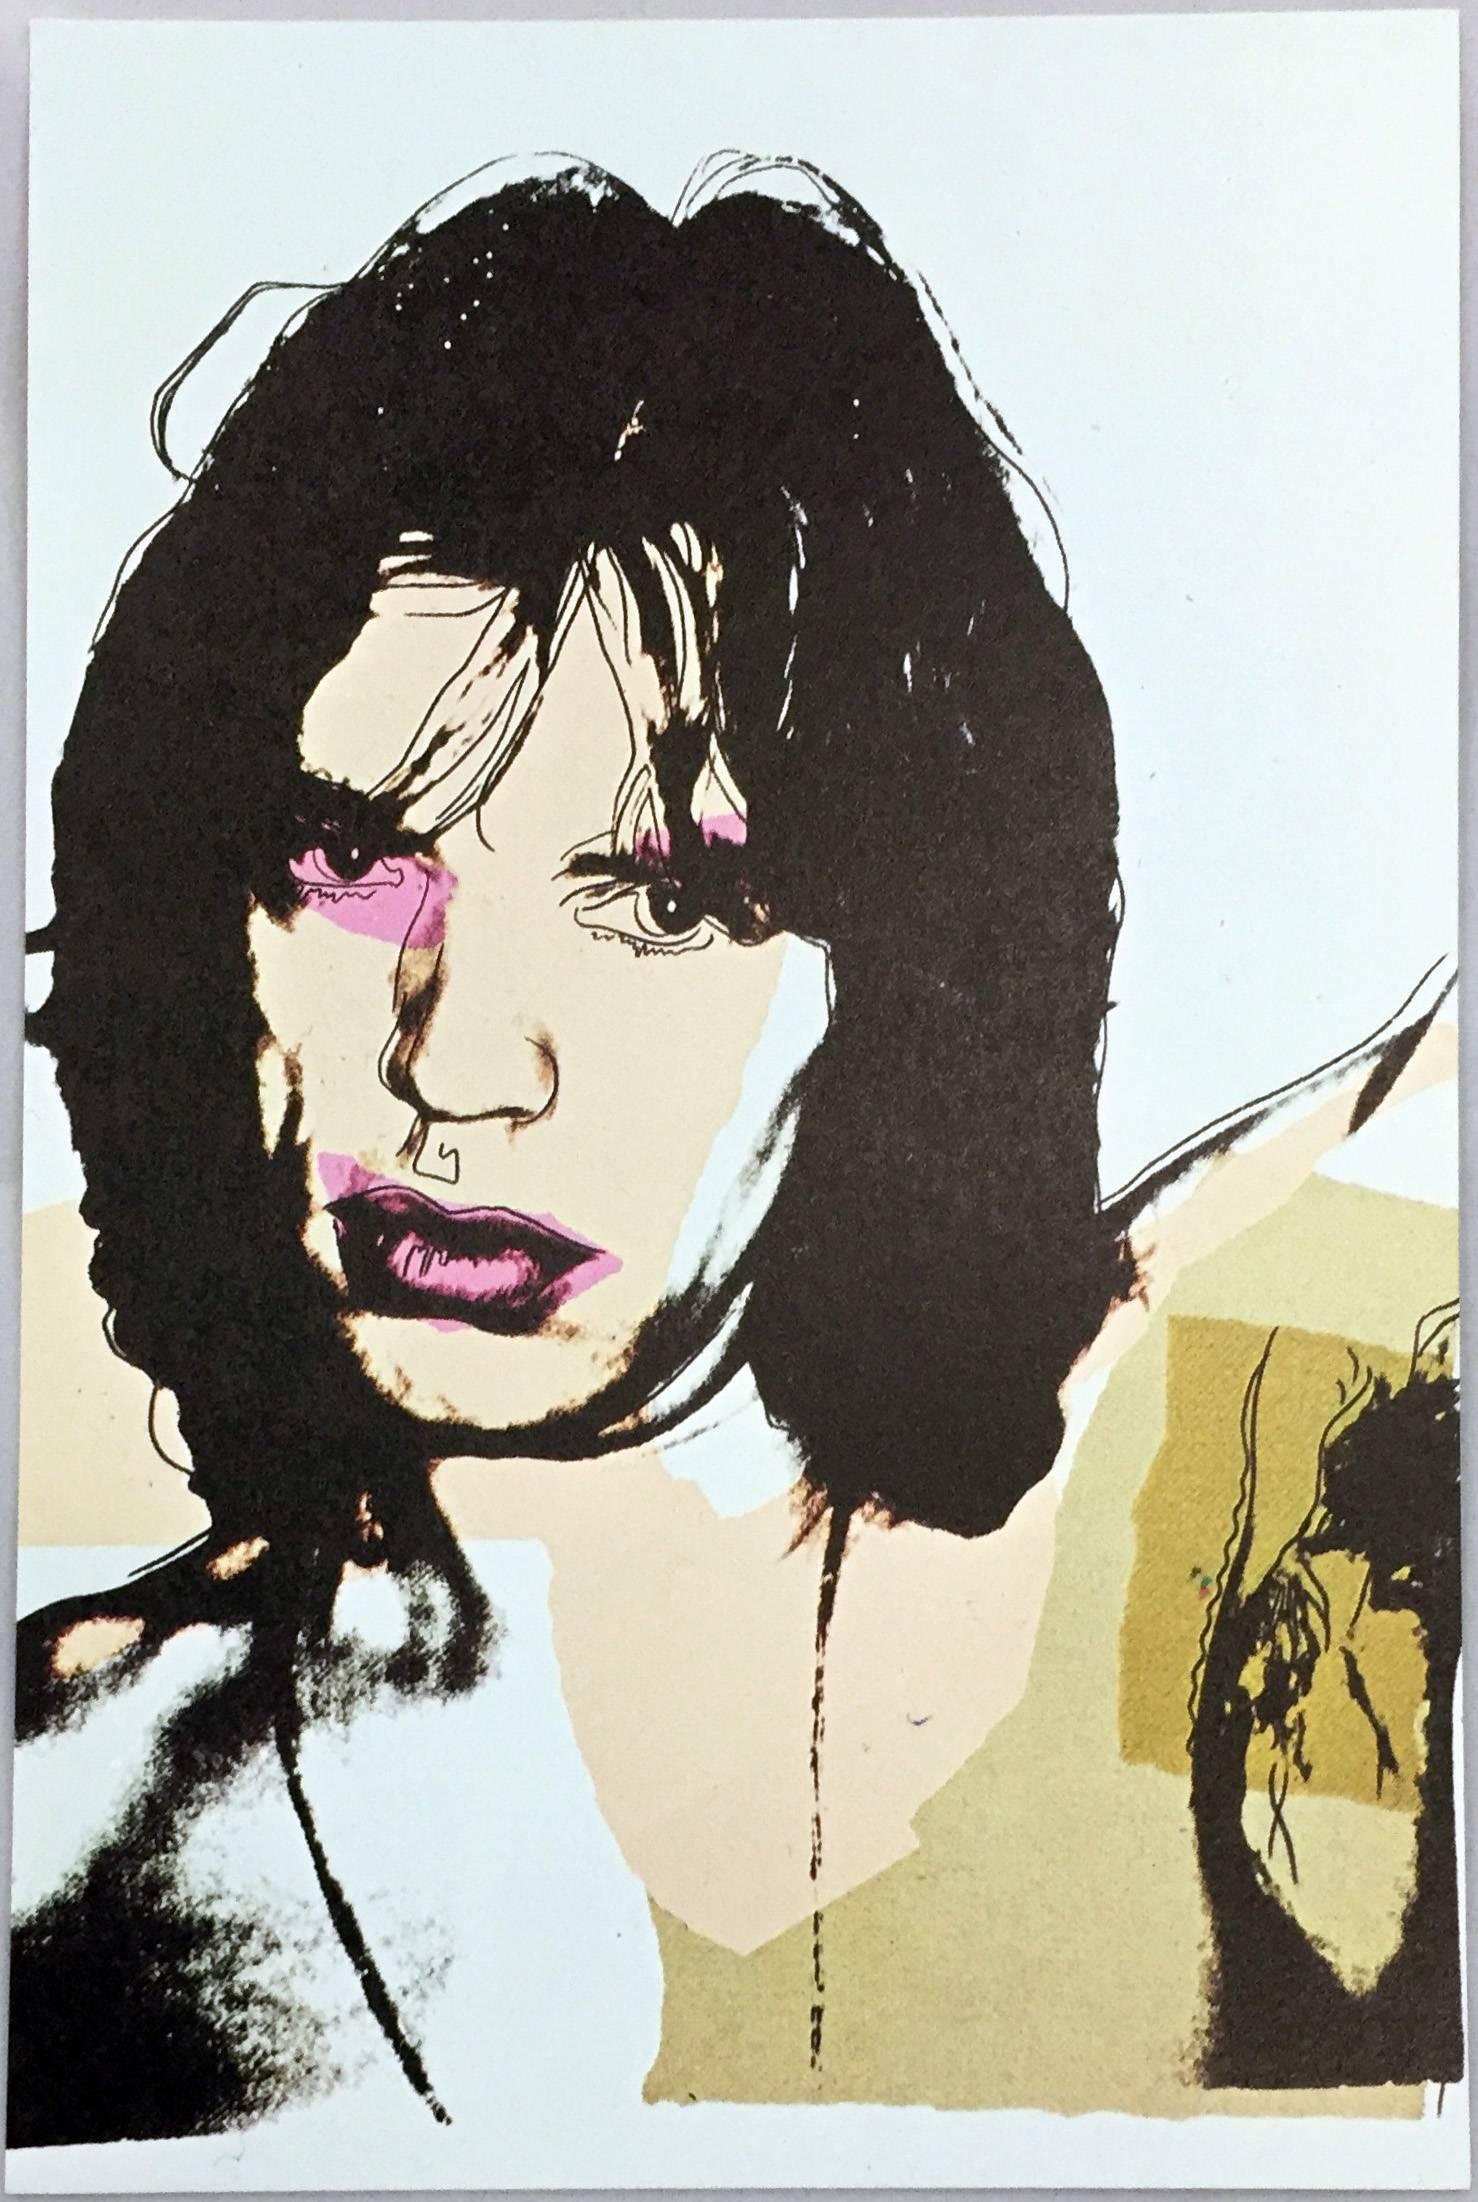 A beautiful set of ten announcement cards published by Castelli Graphics in 1975 to advertise the forthcoming portfolio of ten silkscreen prints by Andy Warhol of Mick Jagger, 1975. This is the first publication not be confused with subsequent later